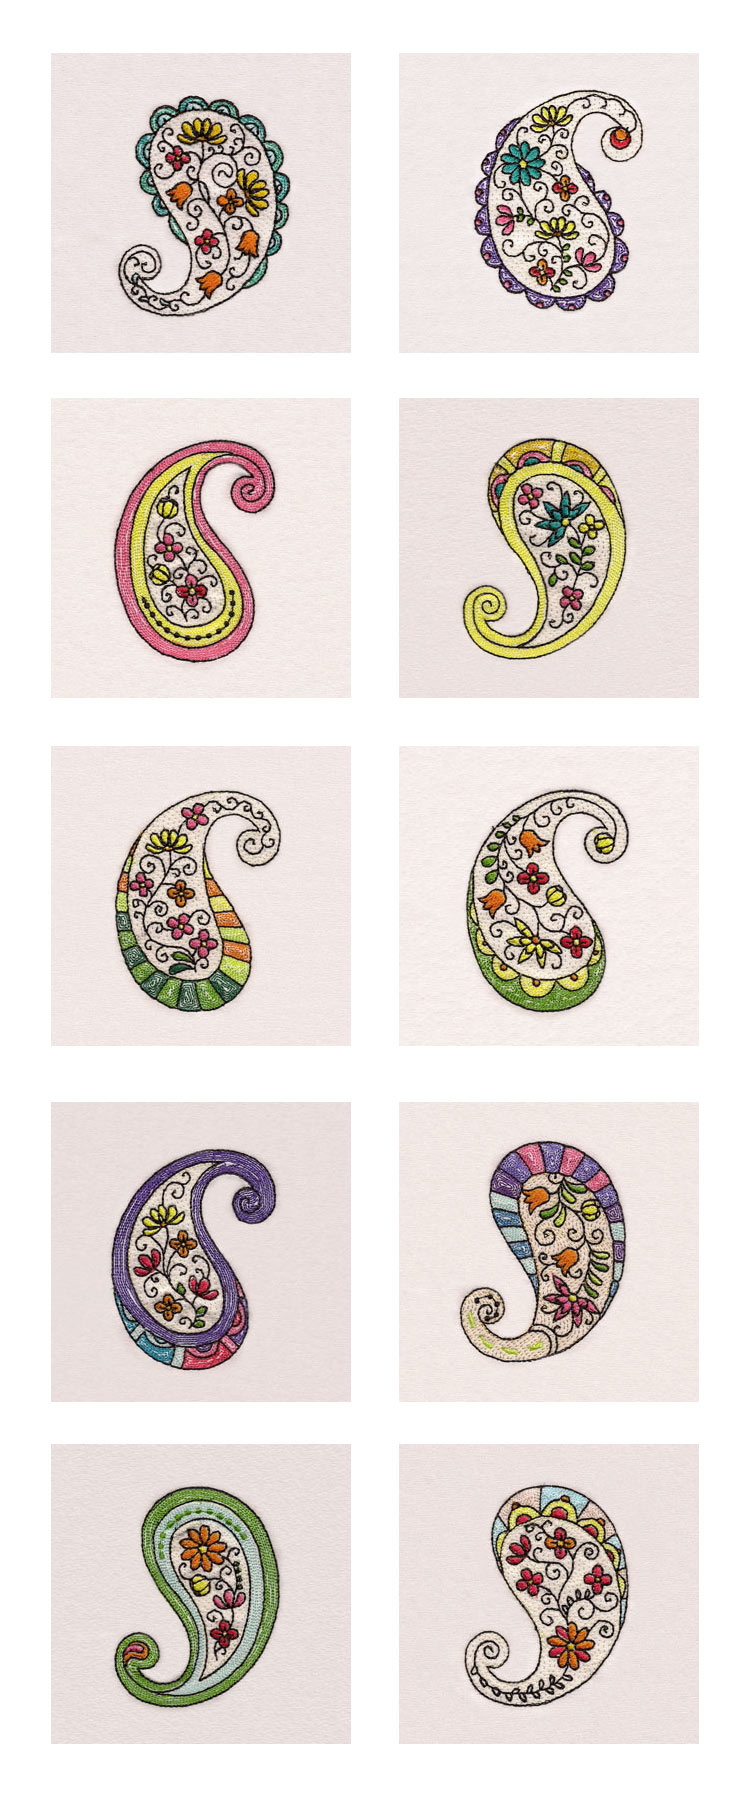 Floral Paisley Embroidery Machine Design Details